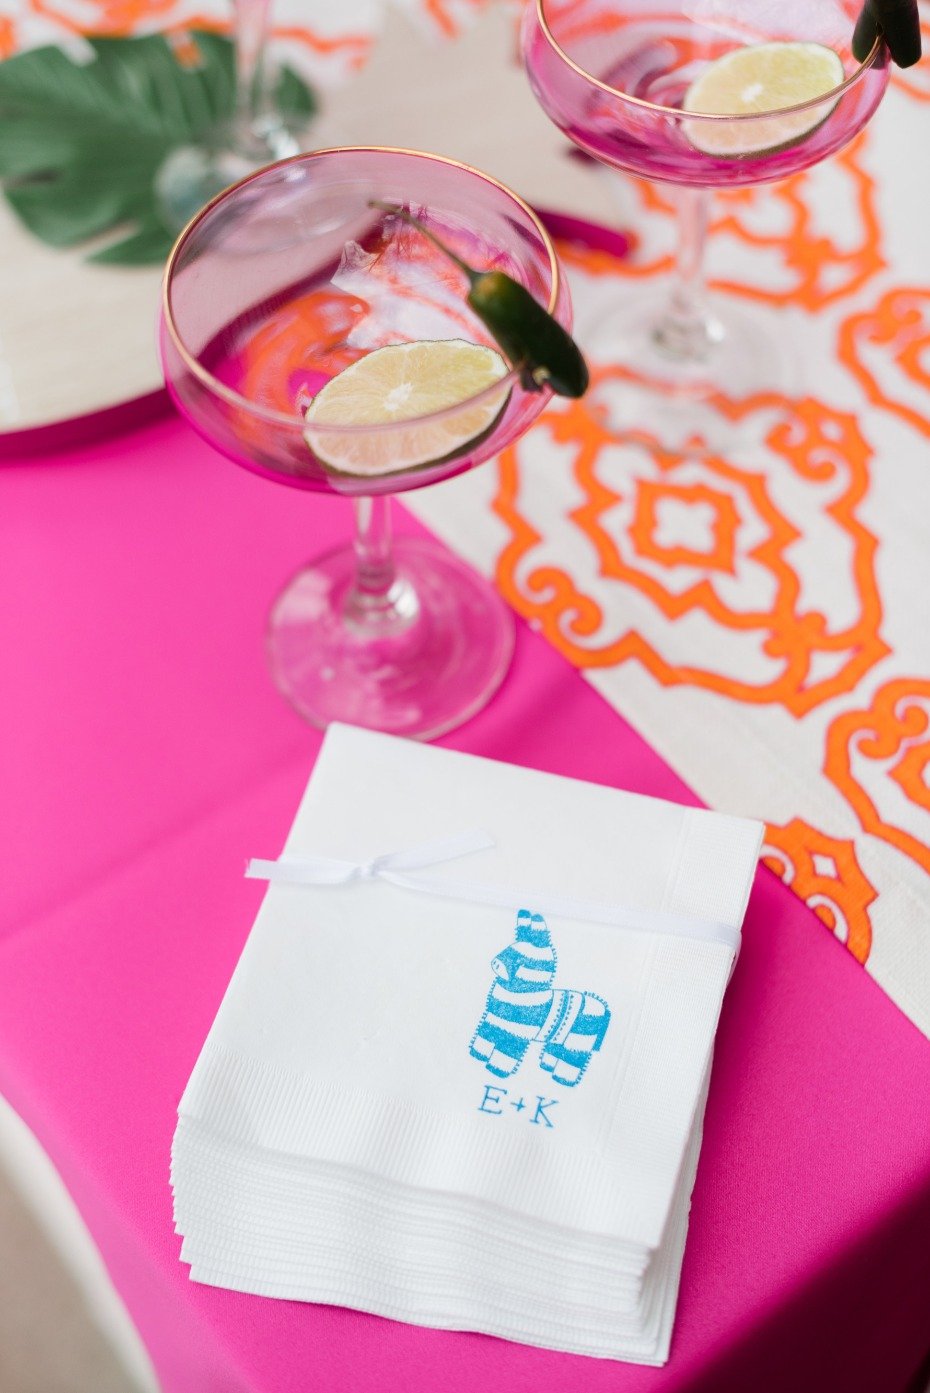 margaritas and cocktail napkins